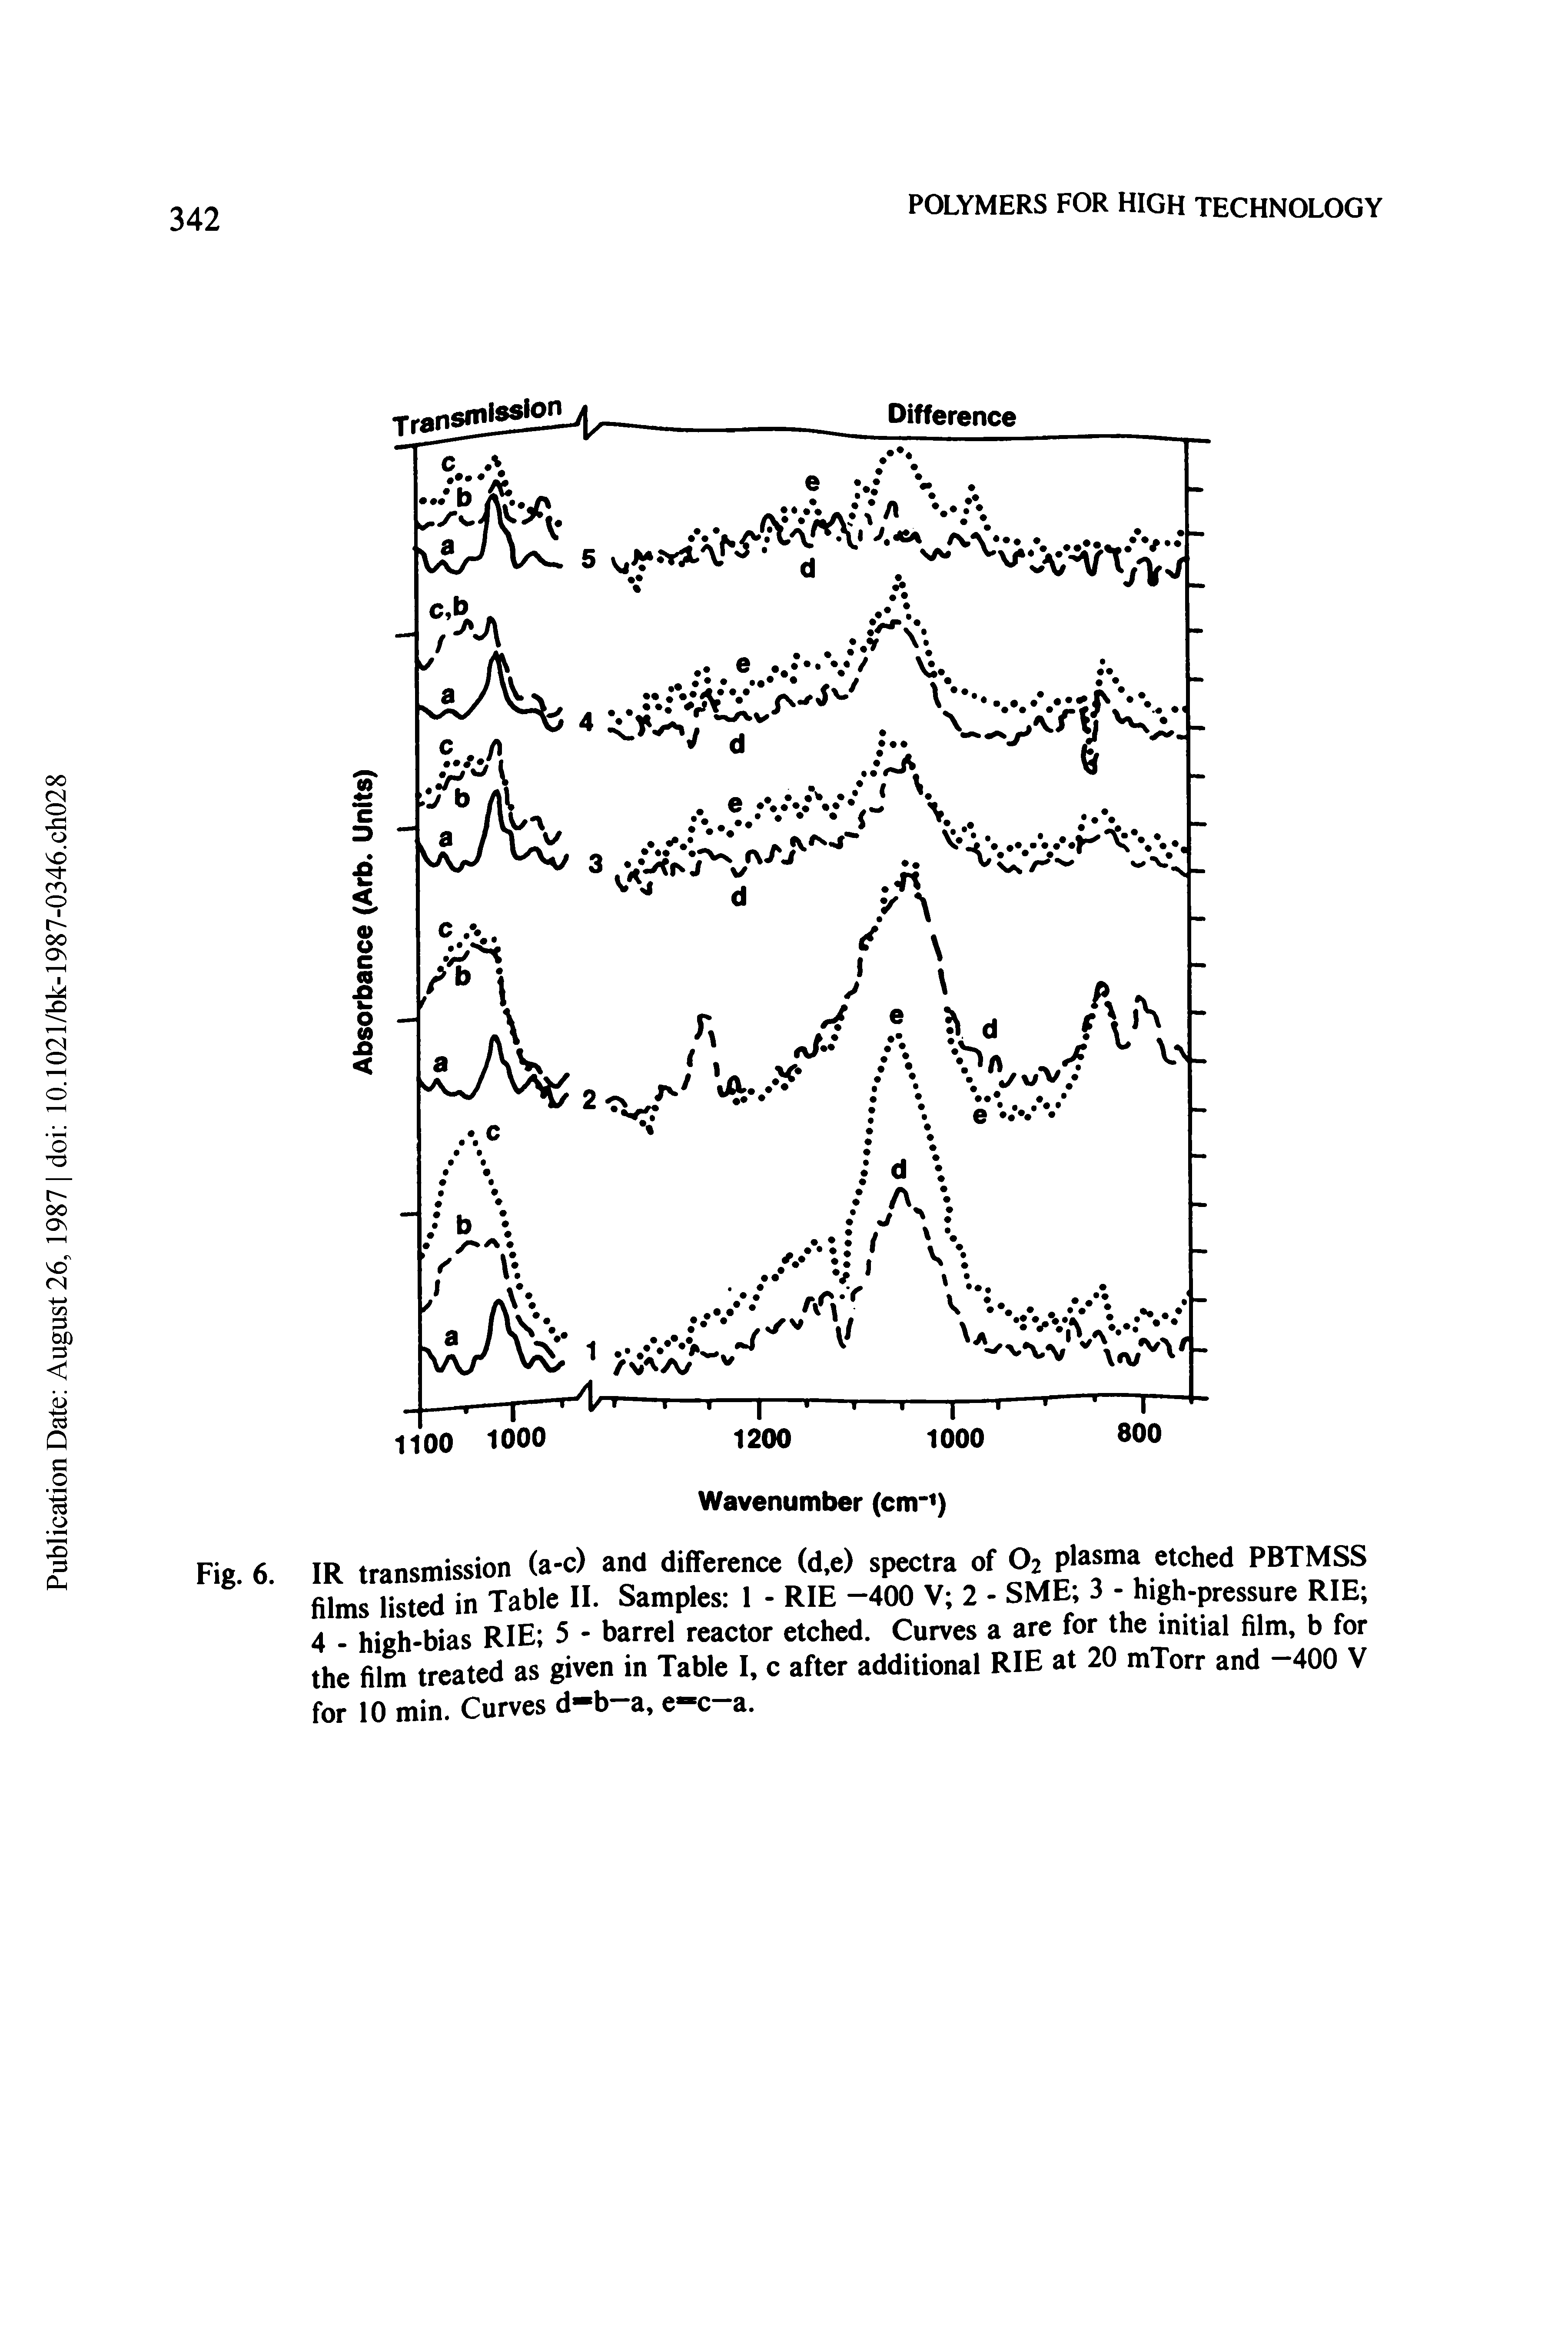 Fig. 6. IR transmission (a-c) and difference (d.e) spectra of O, plasma etched PBTMSS films hst m Table II. Samples I - RIE -400 V 2 - SME 3 - high-pressure RIE - high-bias RIE, 5 - barrel reactor etched. Curves a are for the initial film b for the film treated as given, n Table I, c after additional RIE at 20 mTorr and -400 V for 10 min. Curves d-b-a, e-c a.